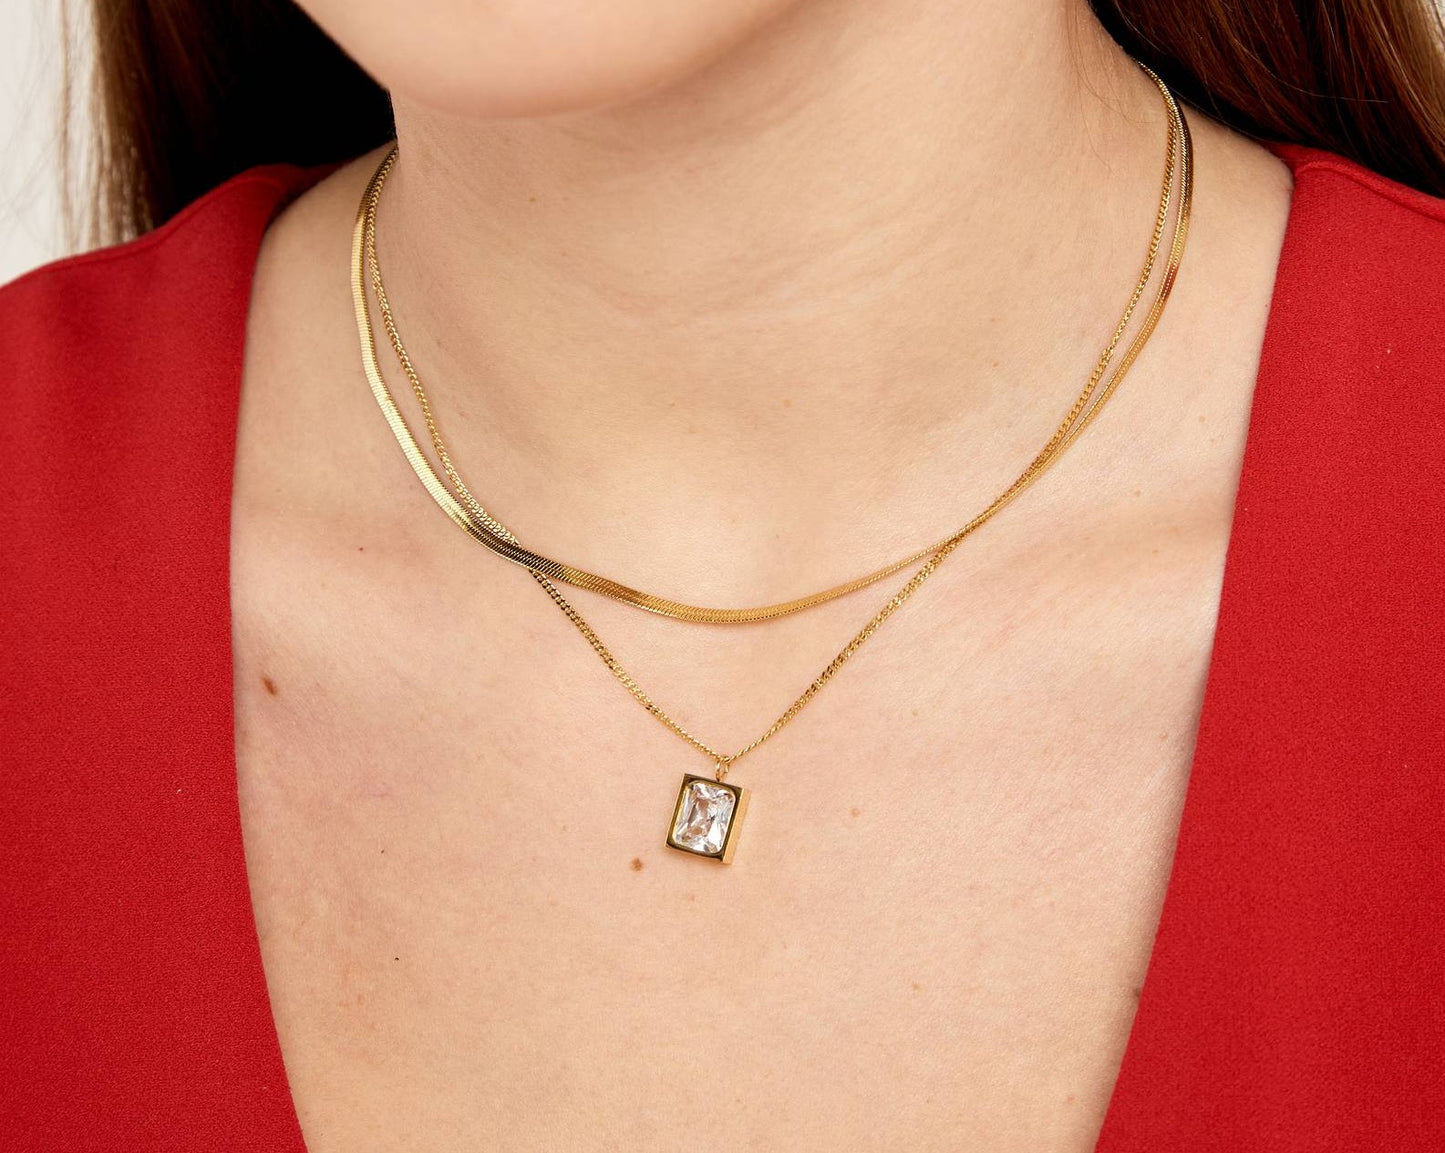 Sparkling Sophistication: Double-Layer Necklace with Zirconia Square Pendant